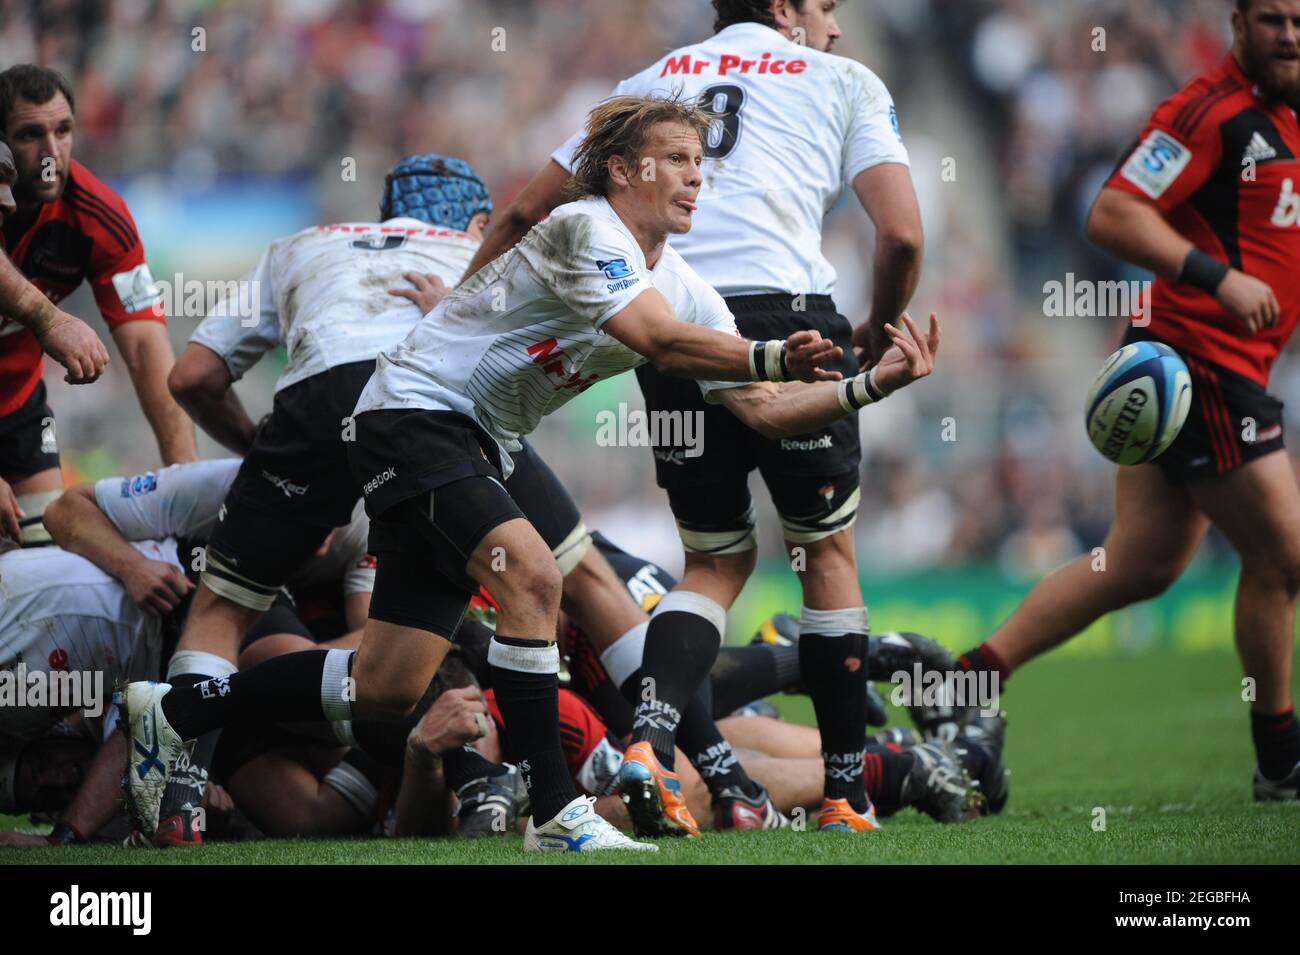 Rugby Union - Crusaders v Sharks Investec Super Rugby - Twickenham Stadium  - 10/11 - 27/3/11 Charl McLeod - Sharks in action Mandatory Credit: Action  Images / Henry Browne Stock Photo - Alamy